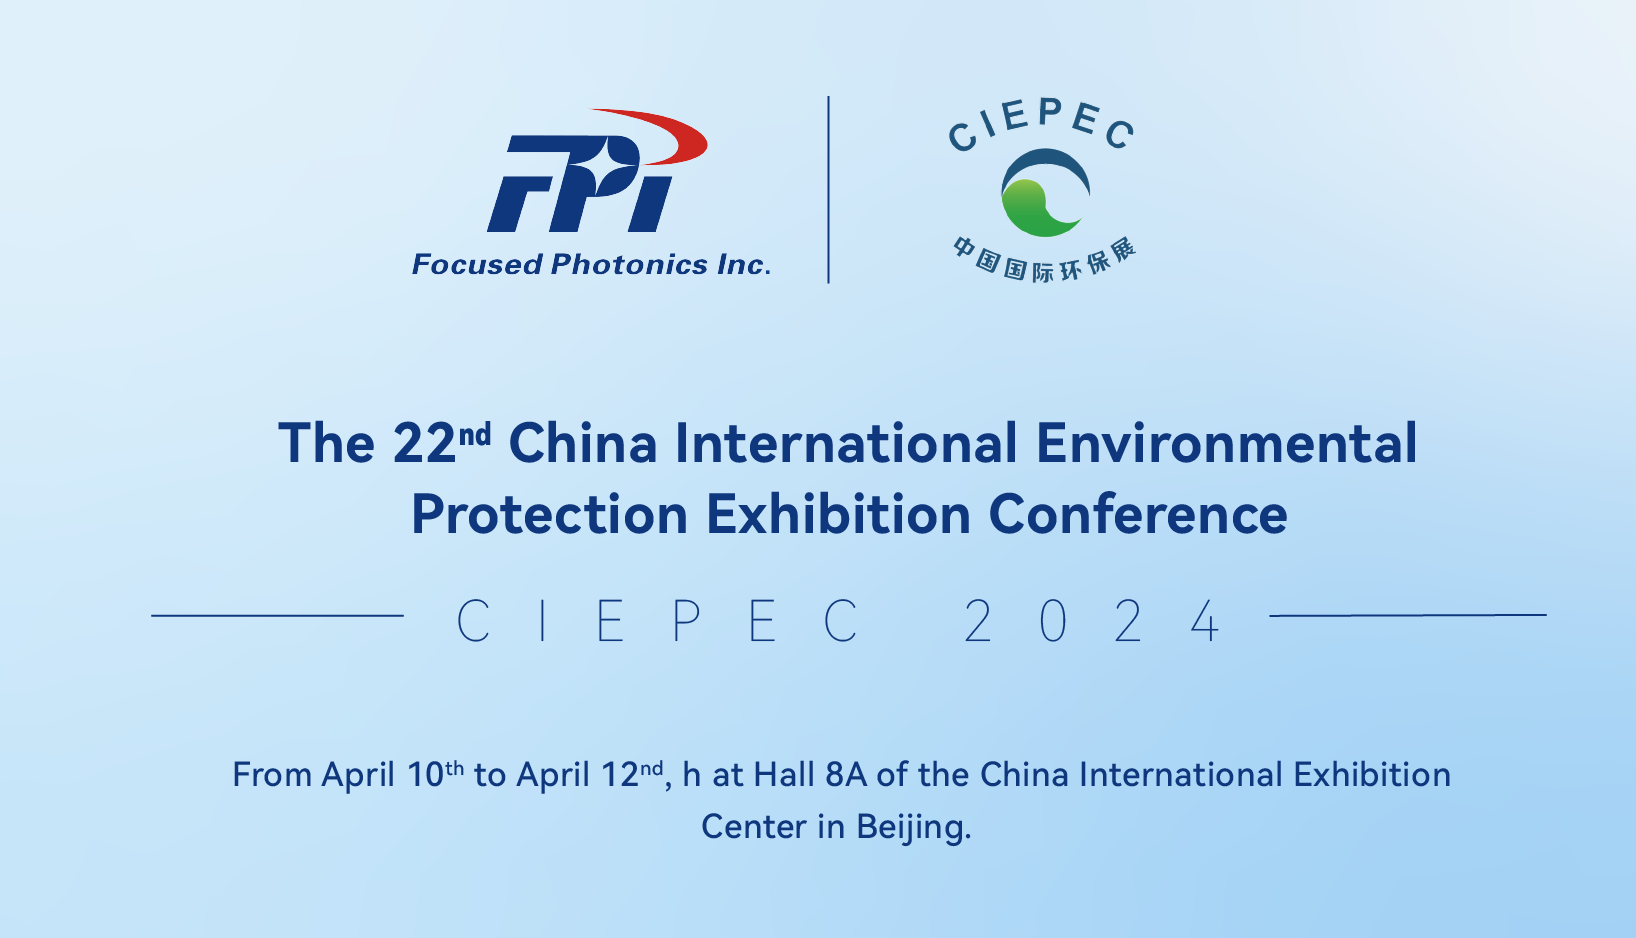 The 22nd China International Environmental Exhibition Wraps Up: FPI Attracts Large Crowds with Innovative Green and Low-Carbon Technologies